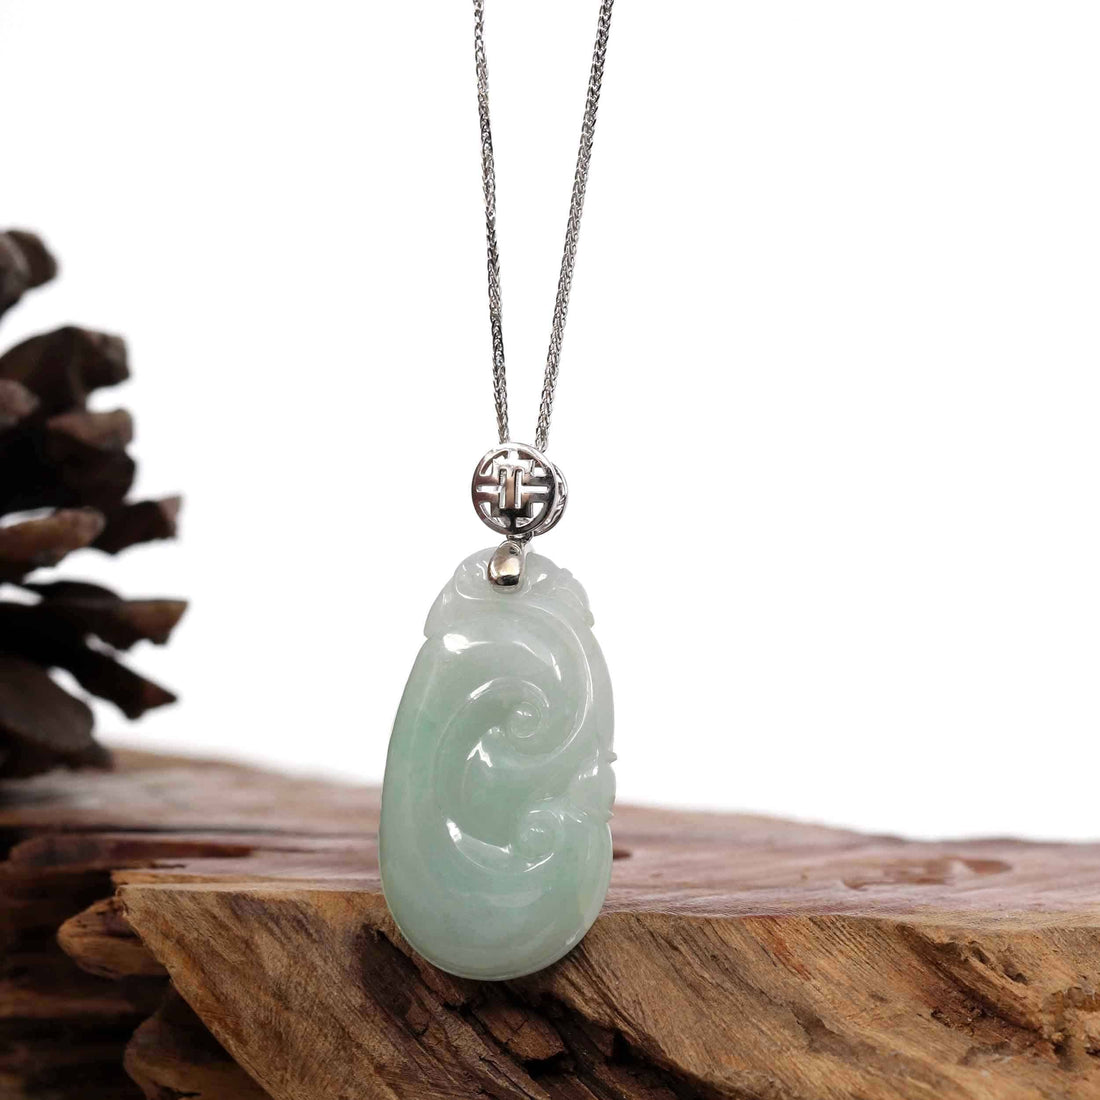 Baikalla Jewelry Jade Guanyin Pendant Necklace Copy of Copy of Natural Light Green Jadeite Jade Ru Yi Pendant Necklace With Sterling Silver Bail